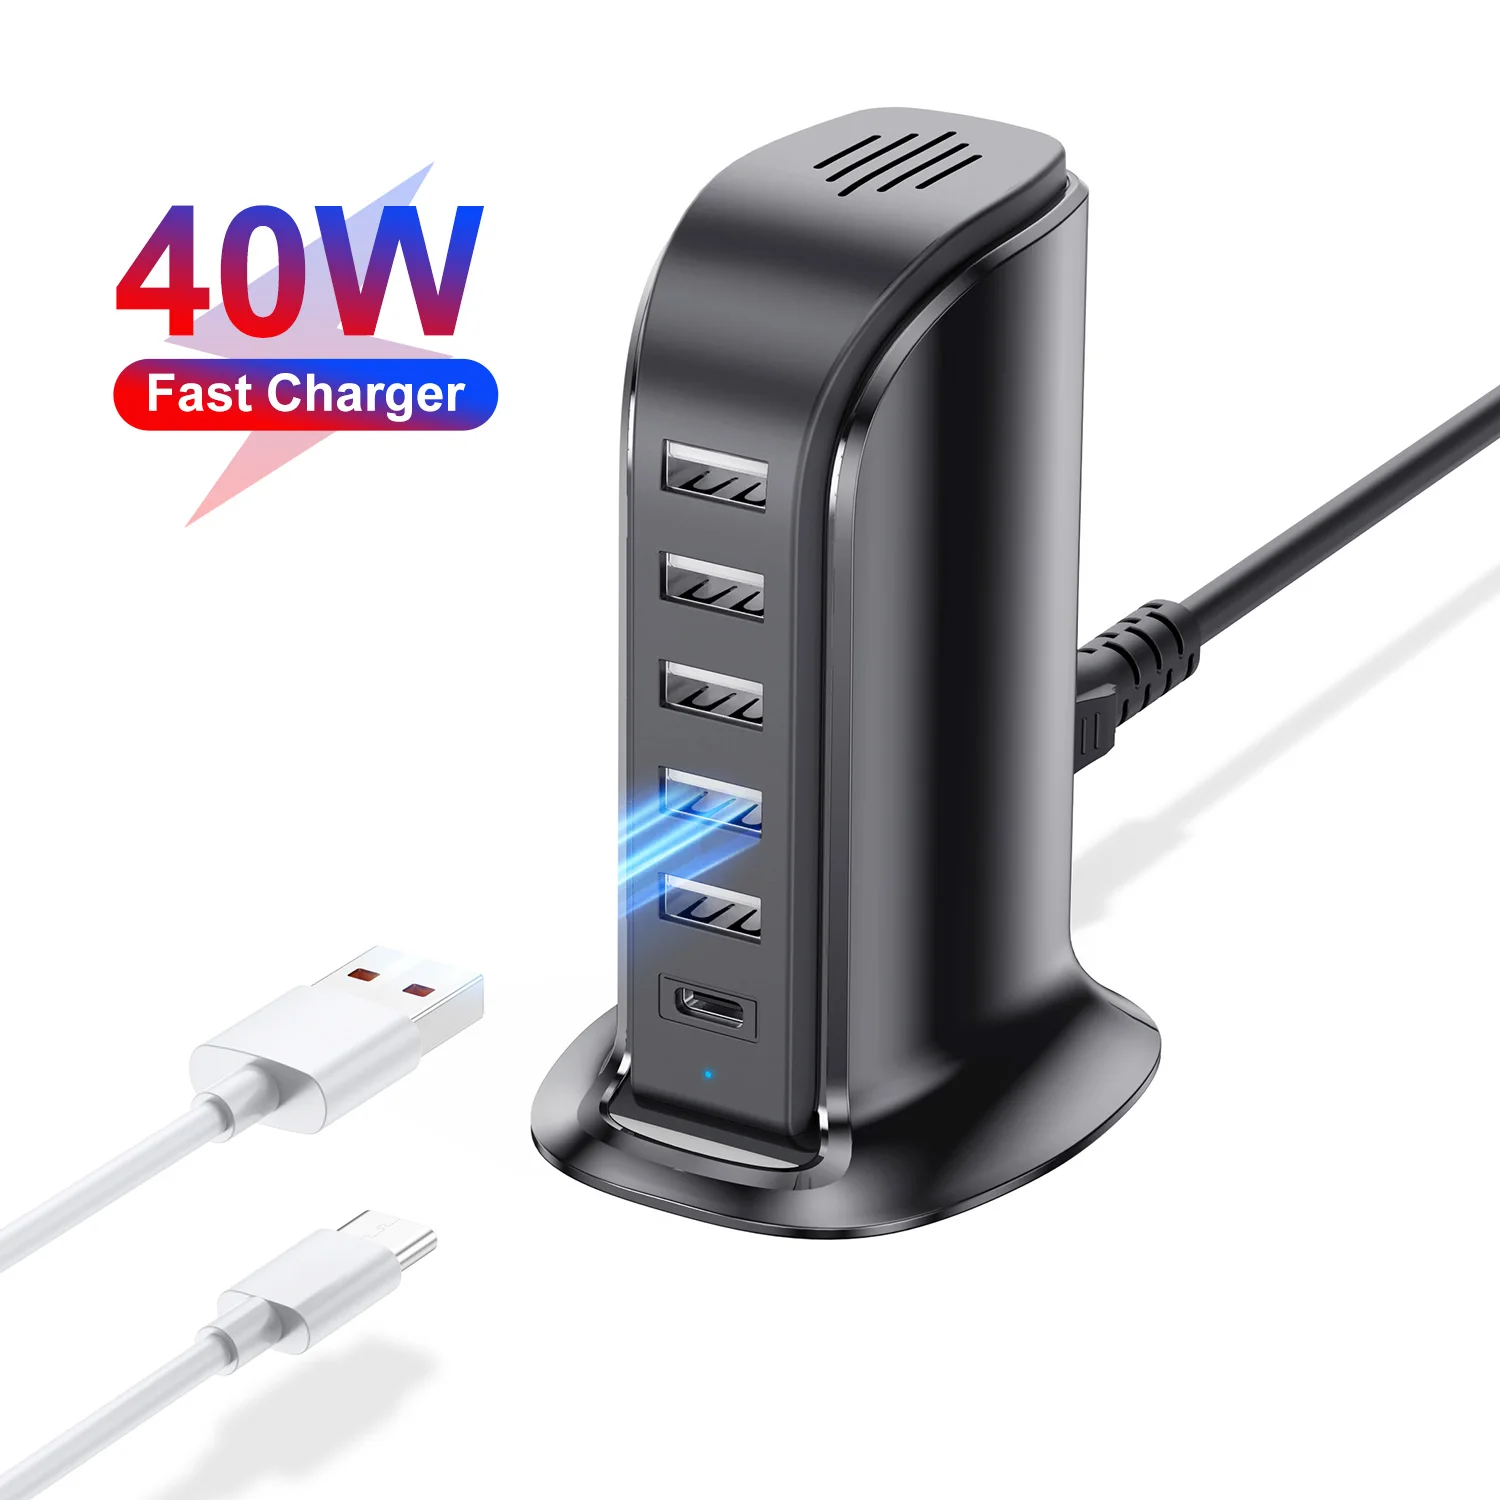 

6 in 1 Multiports 40W Charger, 5 USB A Ports and 1 Type C Port Charging Hub, Universal Phone USB Desktop Charging Station